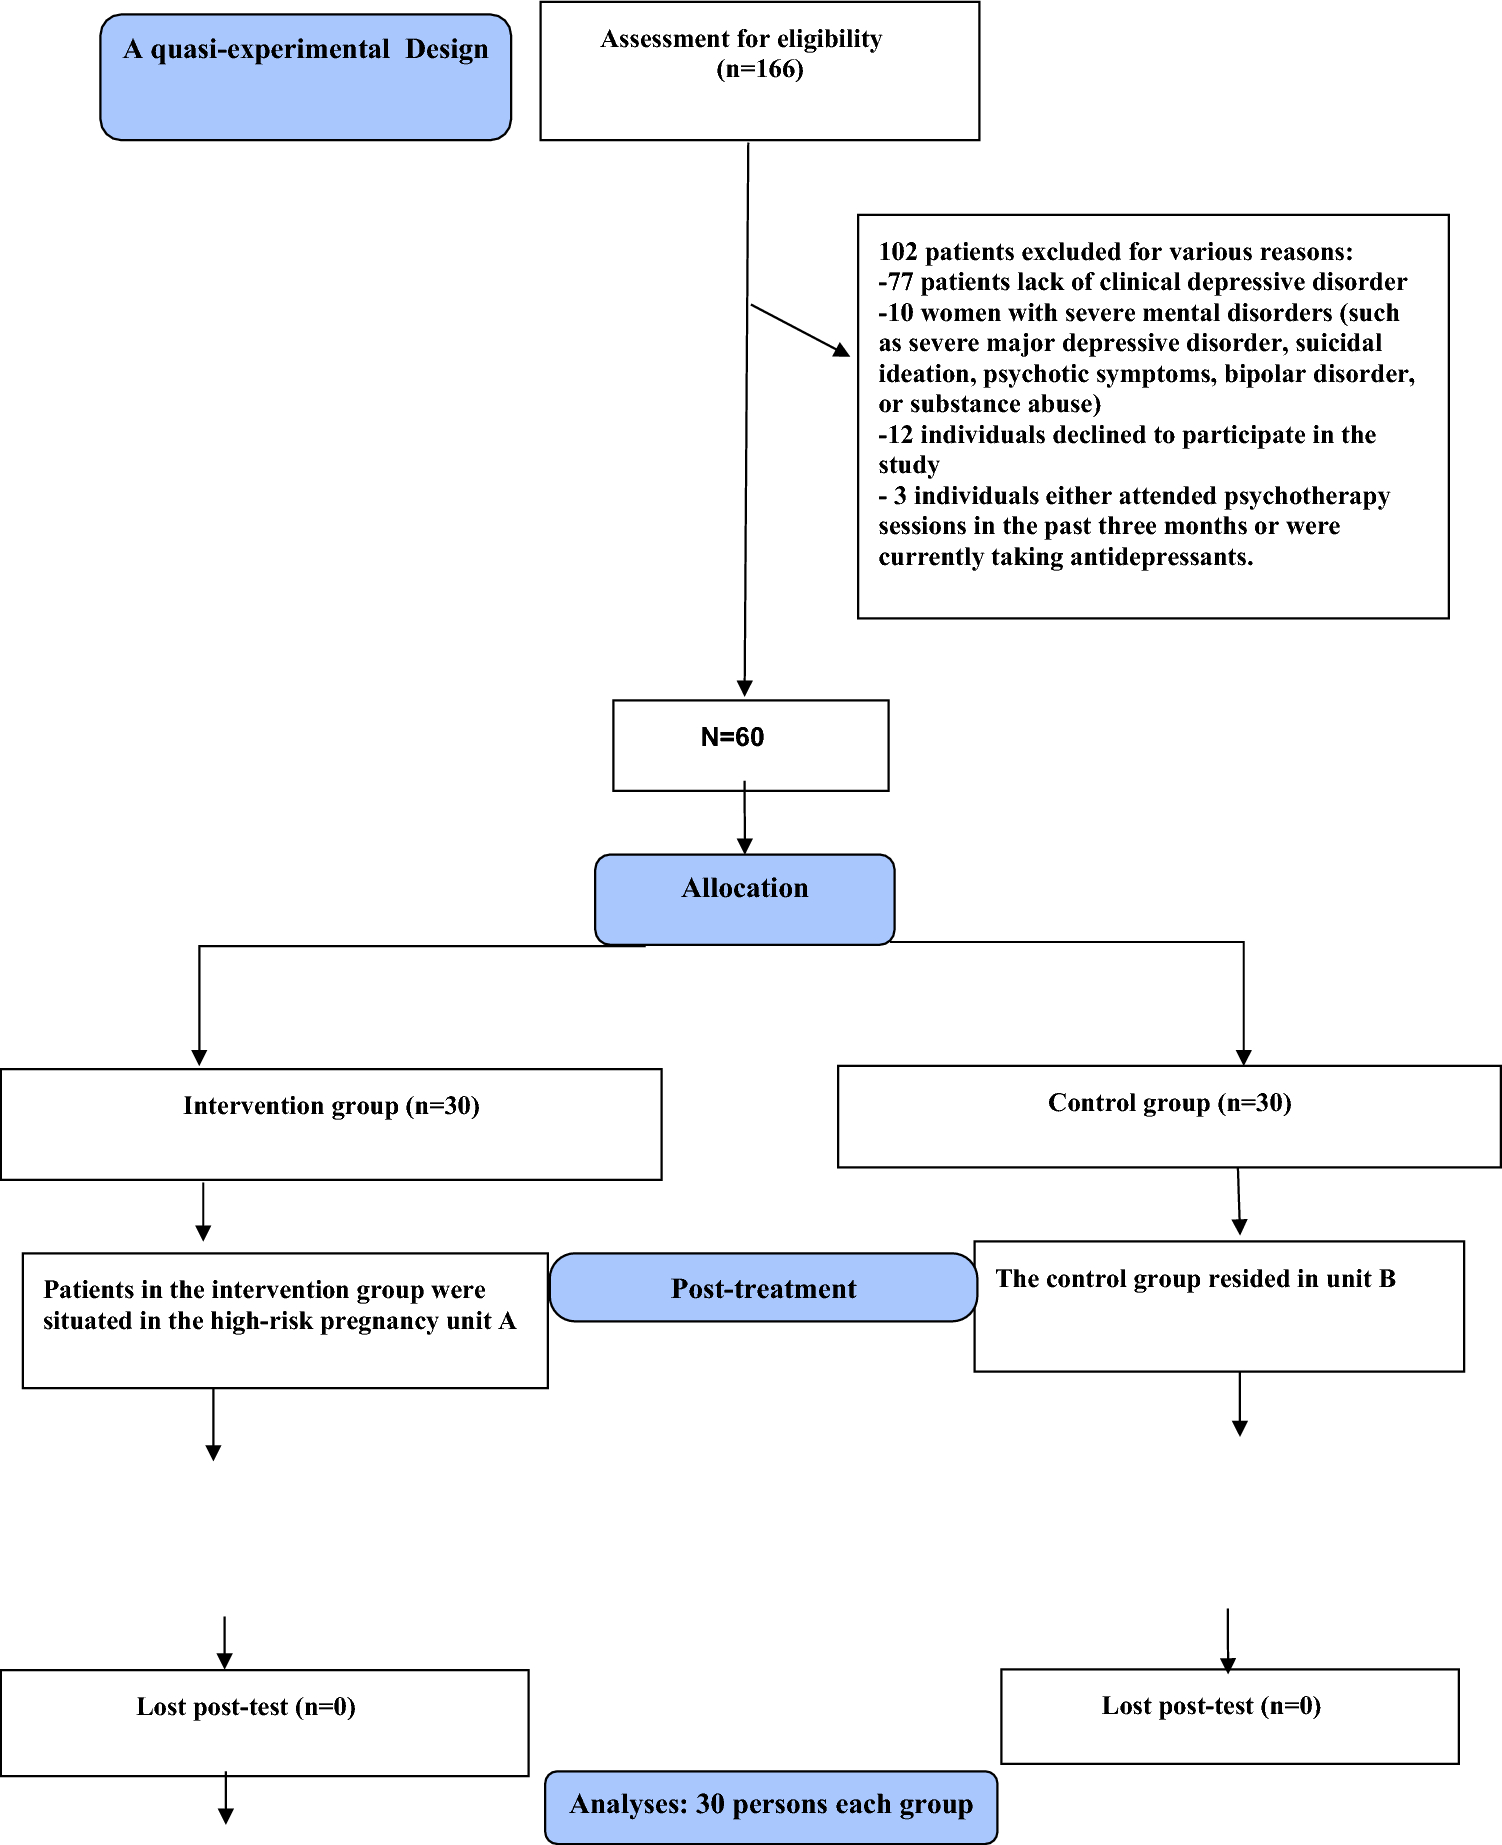 The Efficacy of Therapist-Guided Internet-Based Psychotherapy for Treating Mild to Moderate Depression and Anxiety Among Women Hospitalized with High-Risk Pregnancies